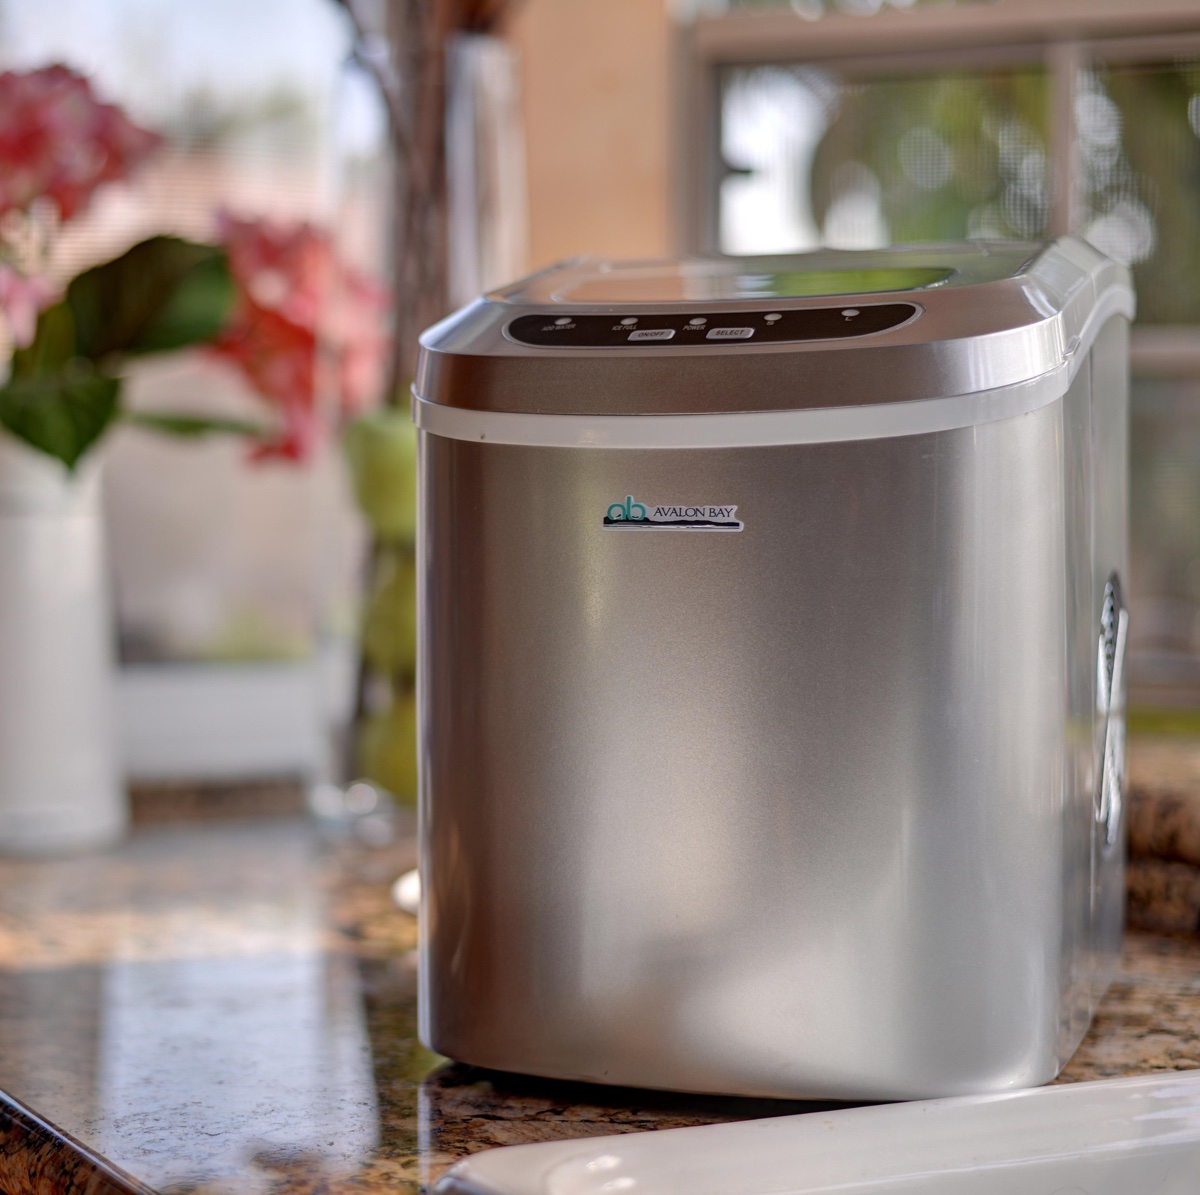 Magic Chef Portable Ice Maker Product Review (RV Living Full Time) 